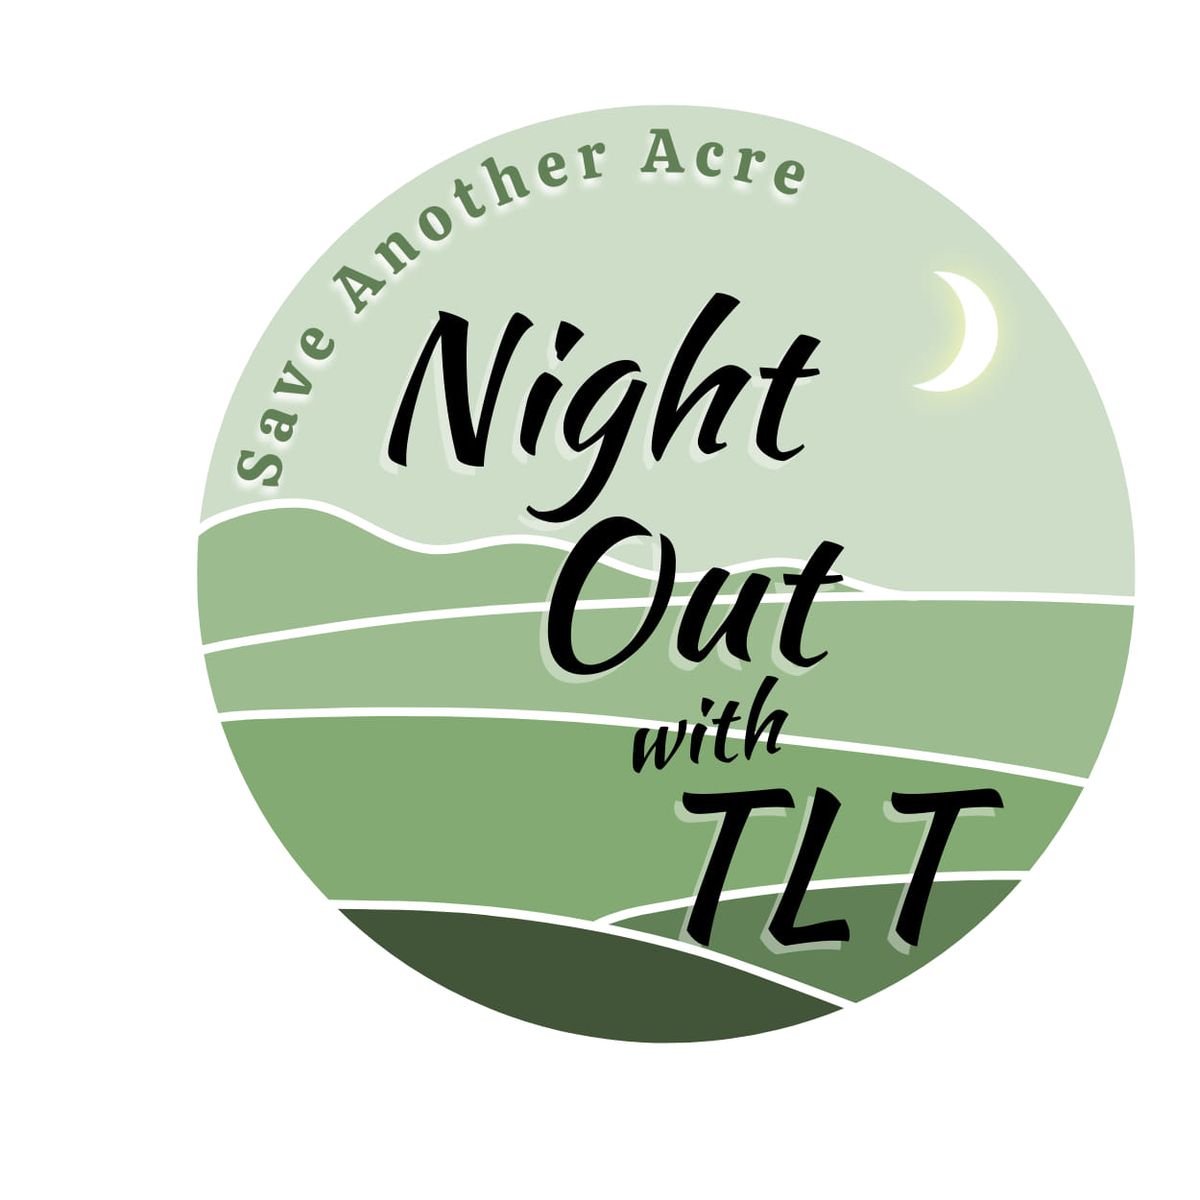 Night Out with TLT- Save Another Acre